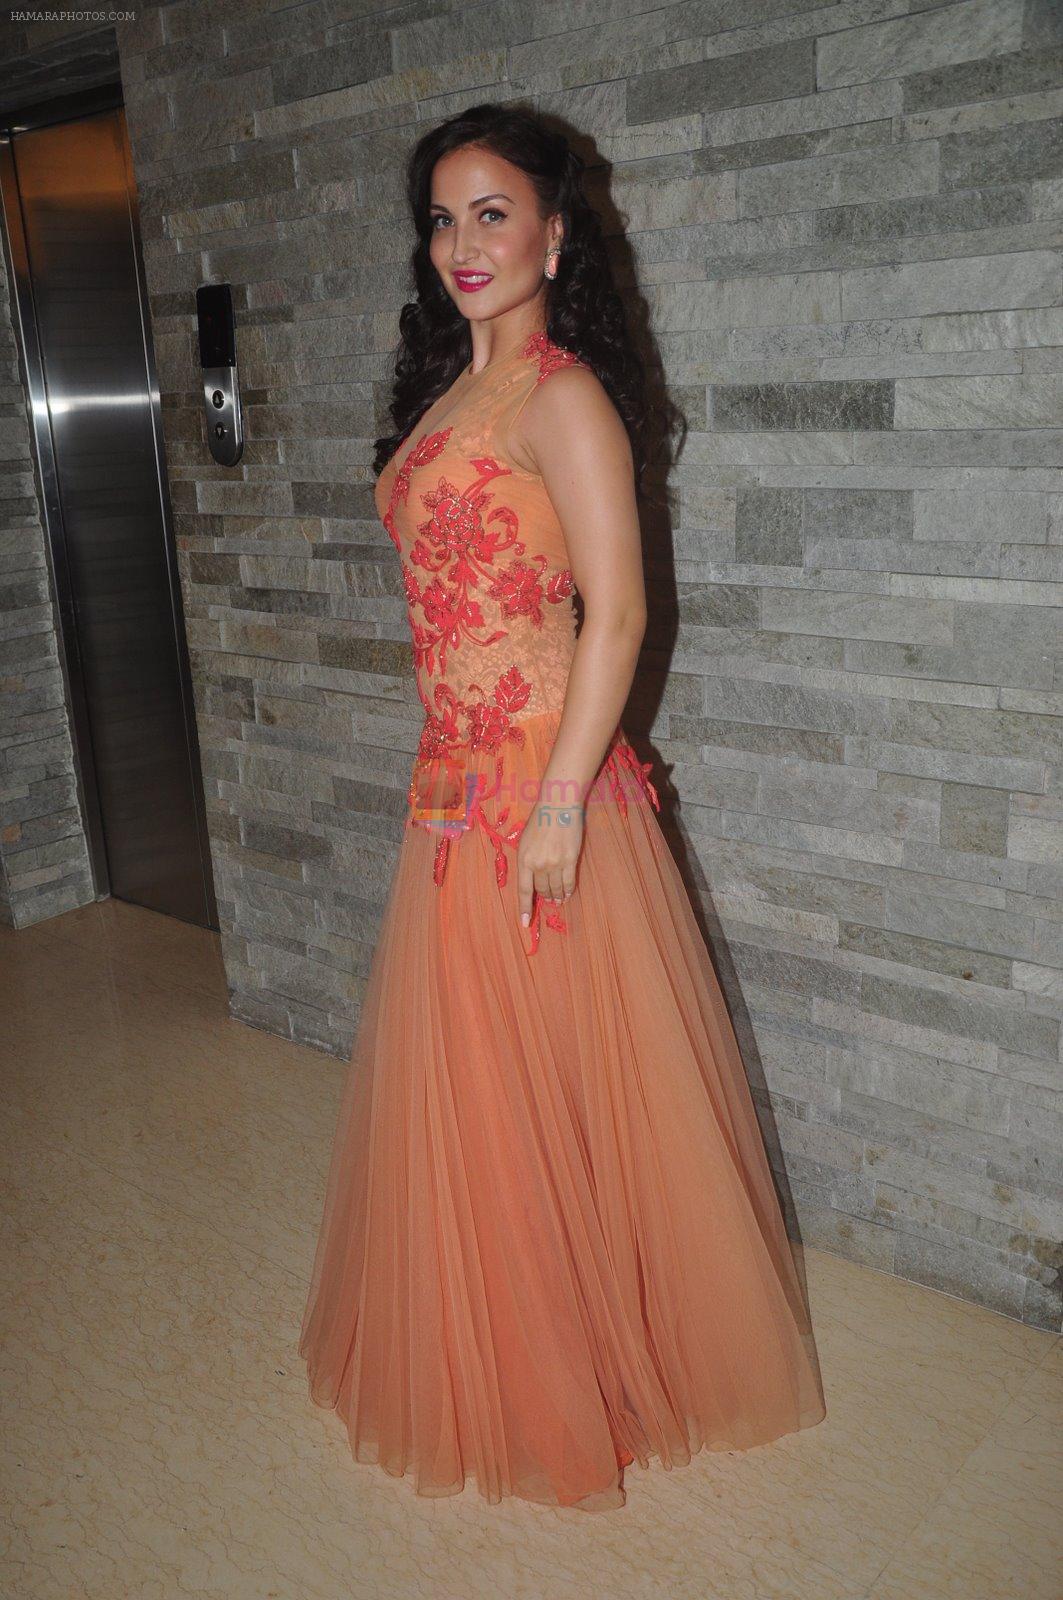 Elli Avram at Femina Officially Gorgeous in Pune on 9th Dec 2014